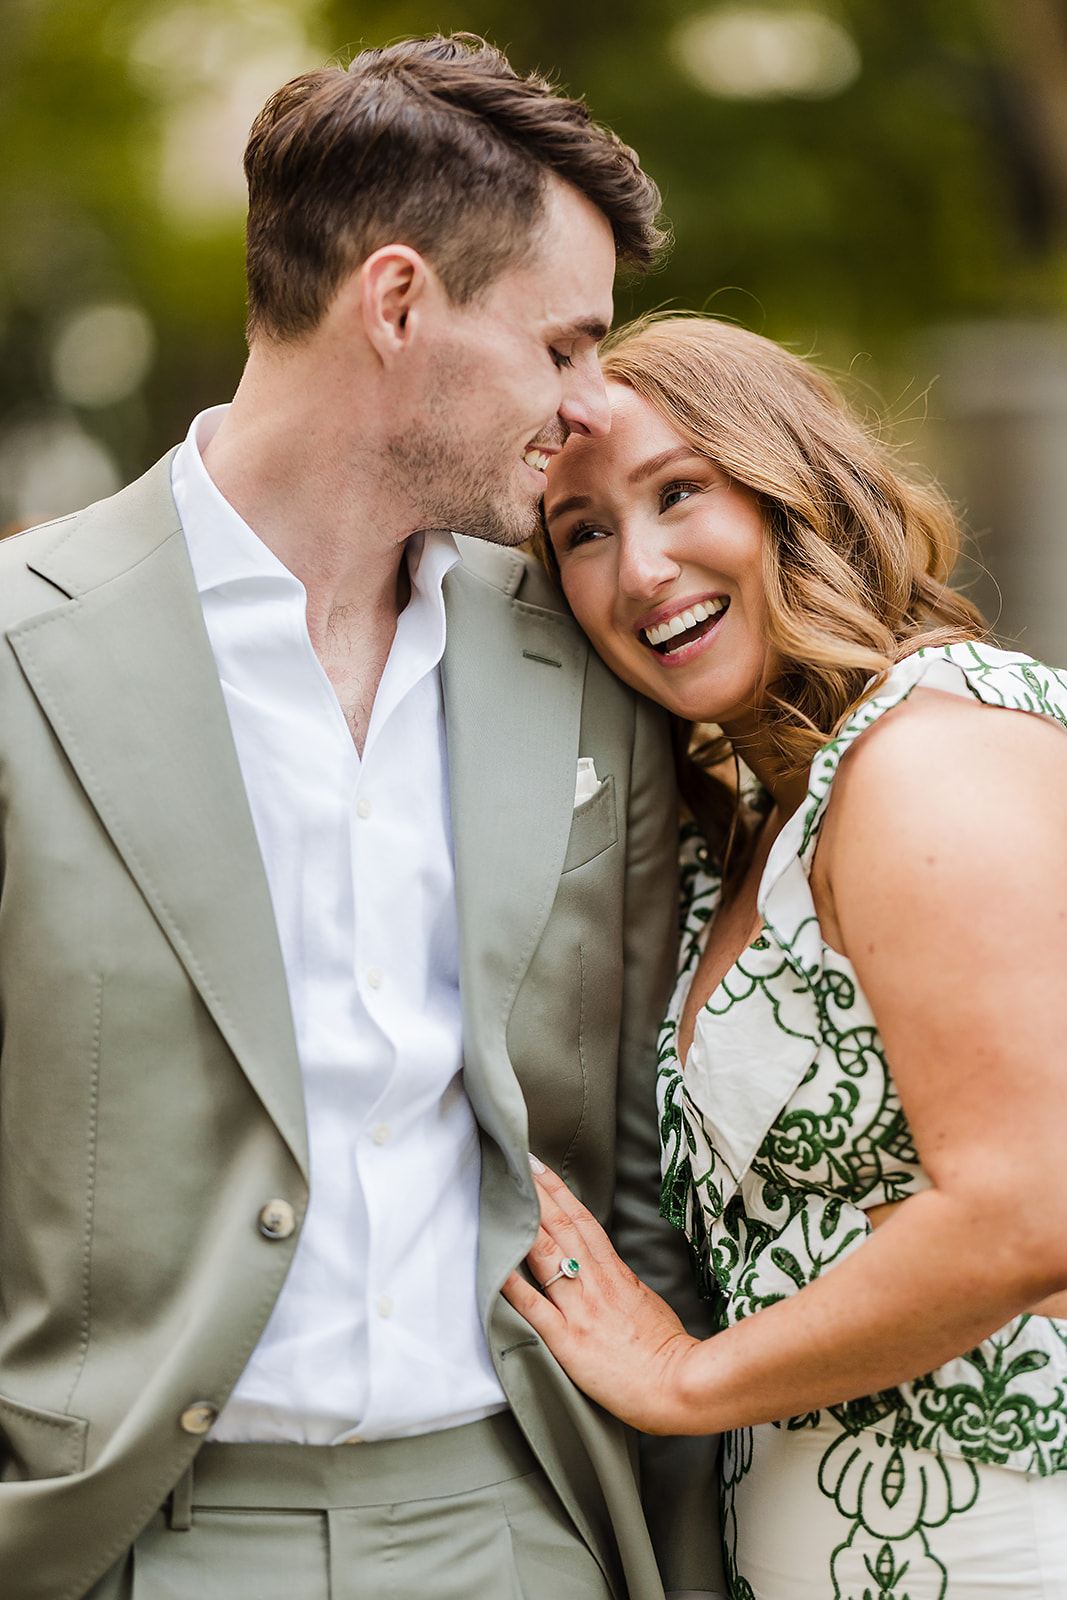 Candid engagement session photos in Philly Old City near Washington square park